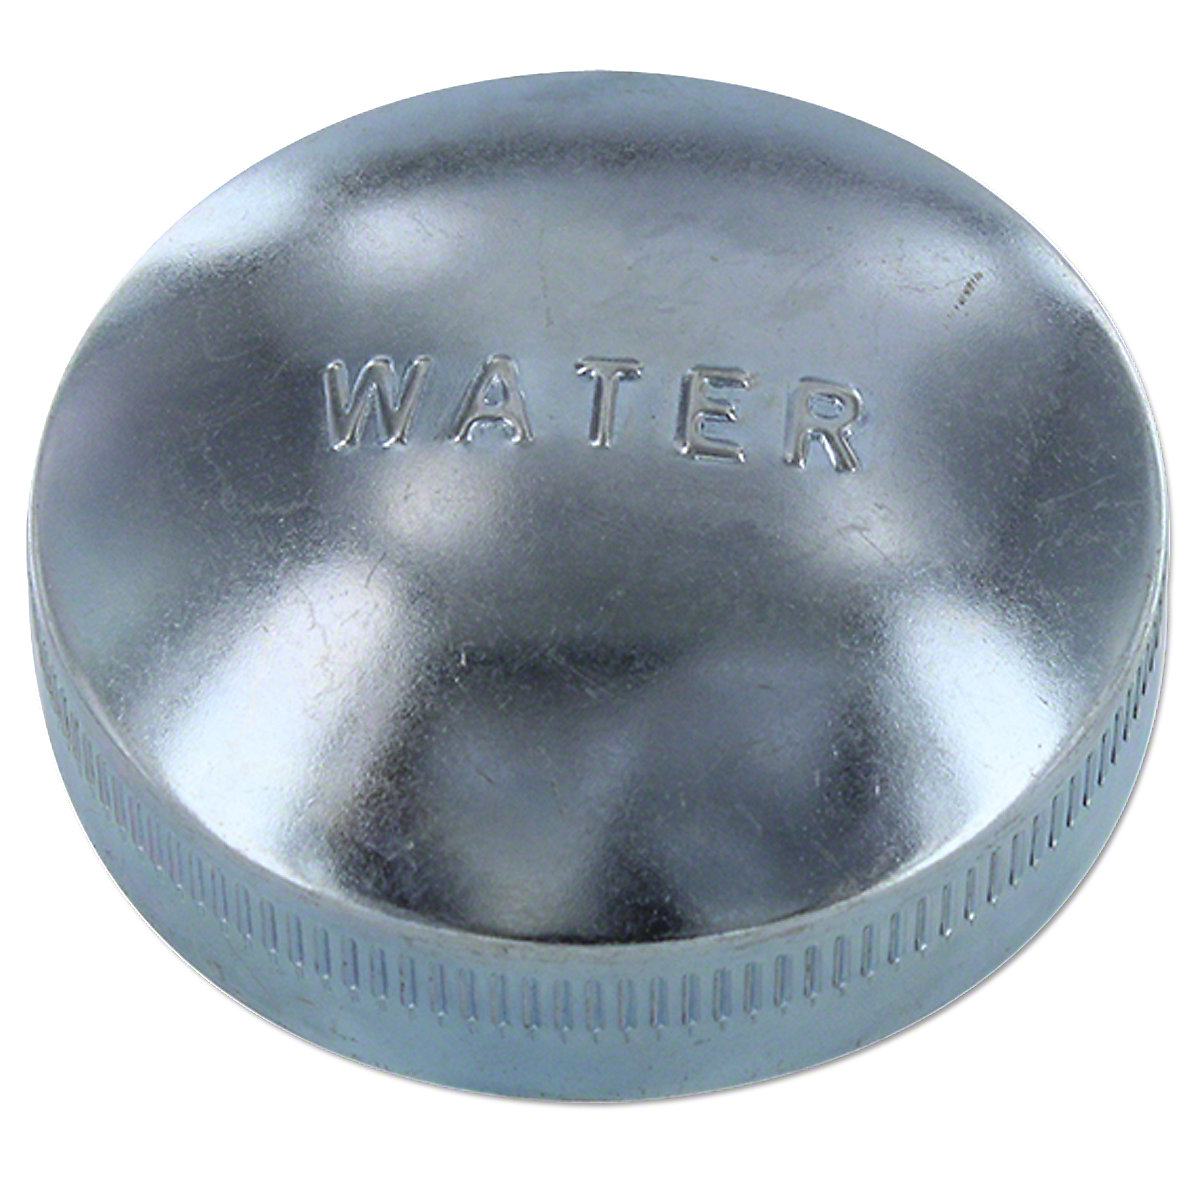 Radiator Cap For Allis Chalmers: WC, WF Unstyled Tractors.